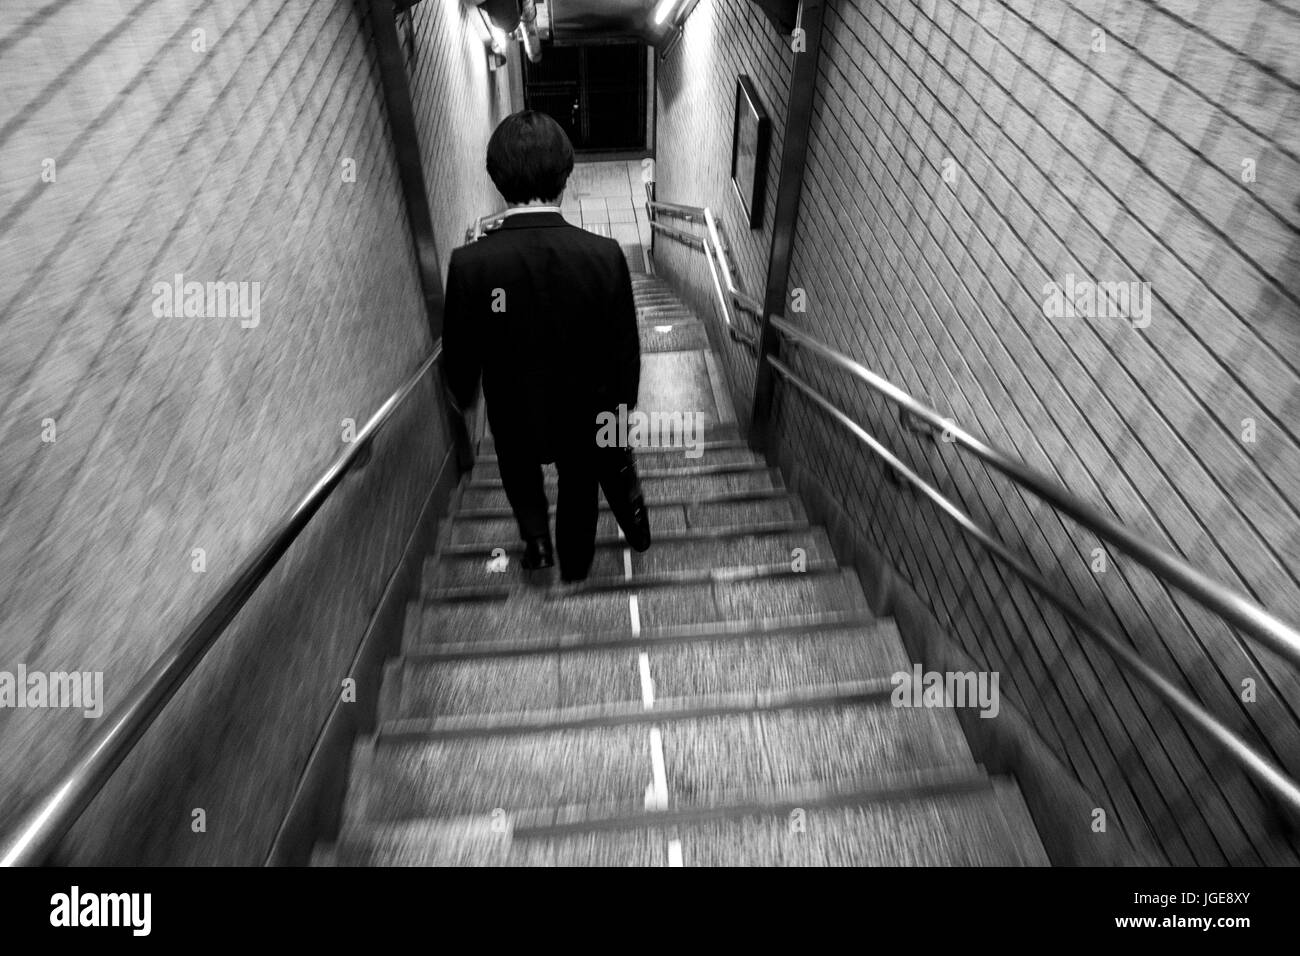 Japanese businessman in a suit walking down staircase at Higashi-Ginza station, Tokyo, Japan Stock Photo